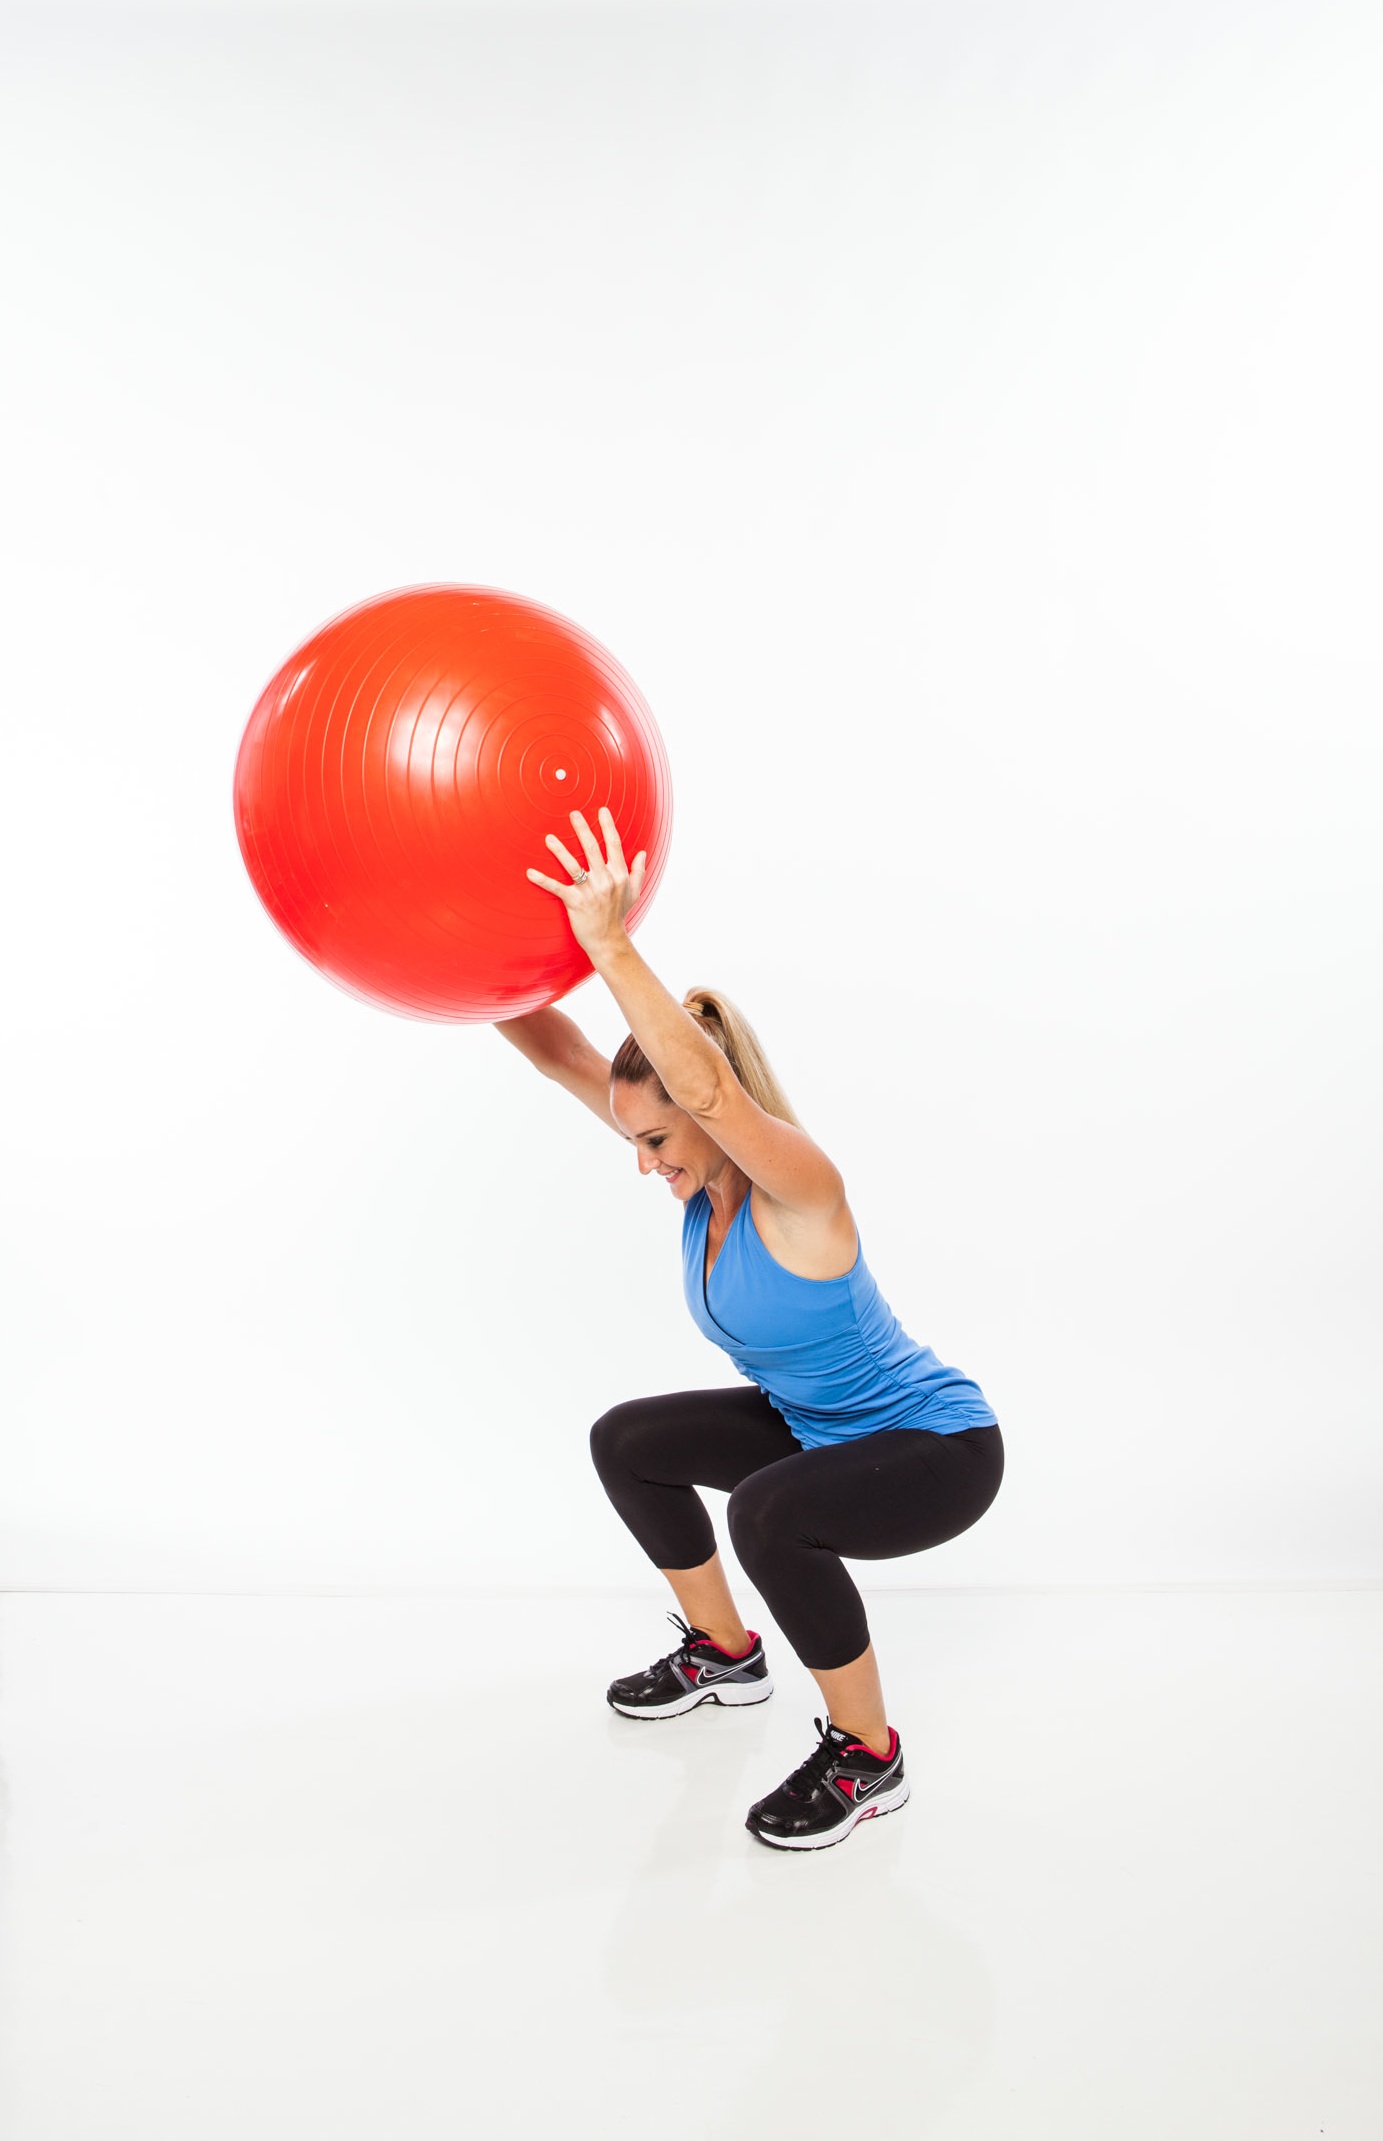 Total Body Exercise Ball Workout - 10 Minute Physioball Routine